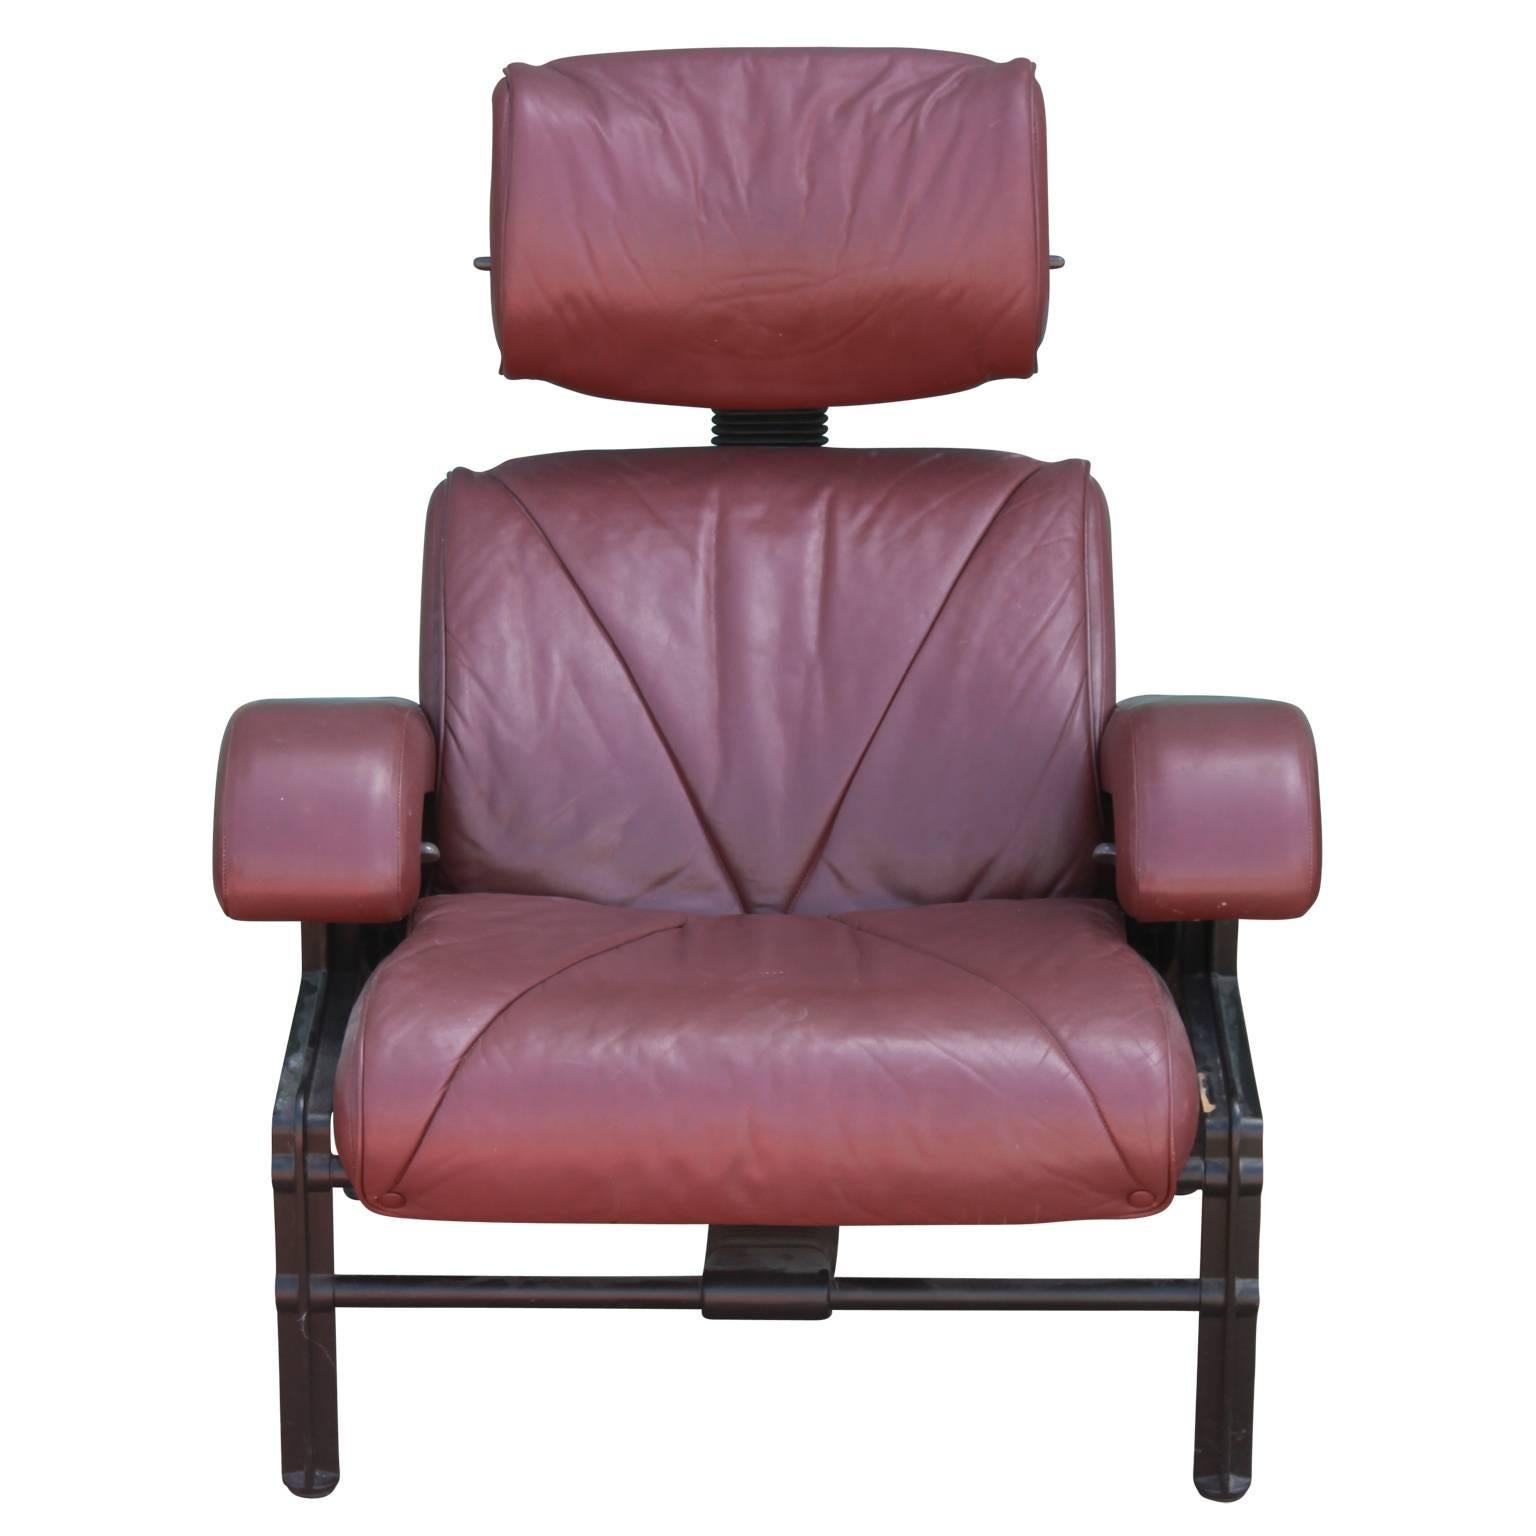 Rare Sunar Hauserman Jefferson leather reclining chair and ottoman designed by Niels Diffrient in 1984. It is adjustable at the seat, back and headrest. 
Ottoman measures: H 17 in x W 28 in x D 21 in. 